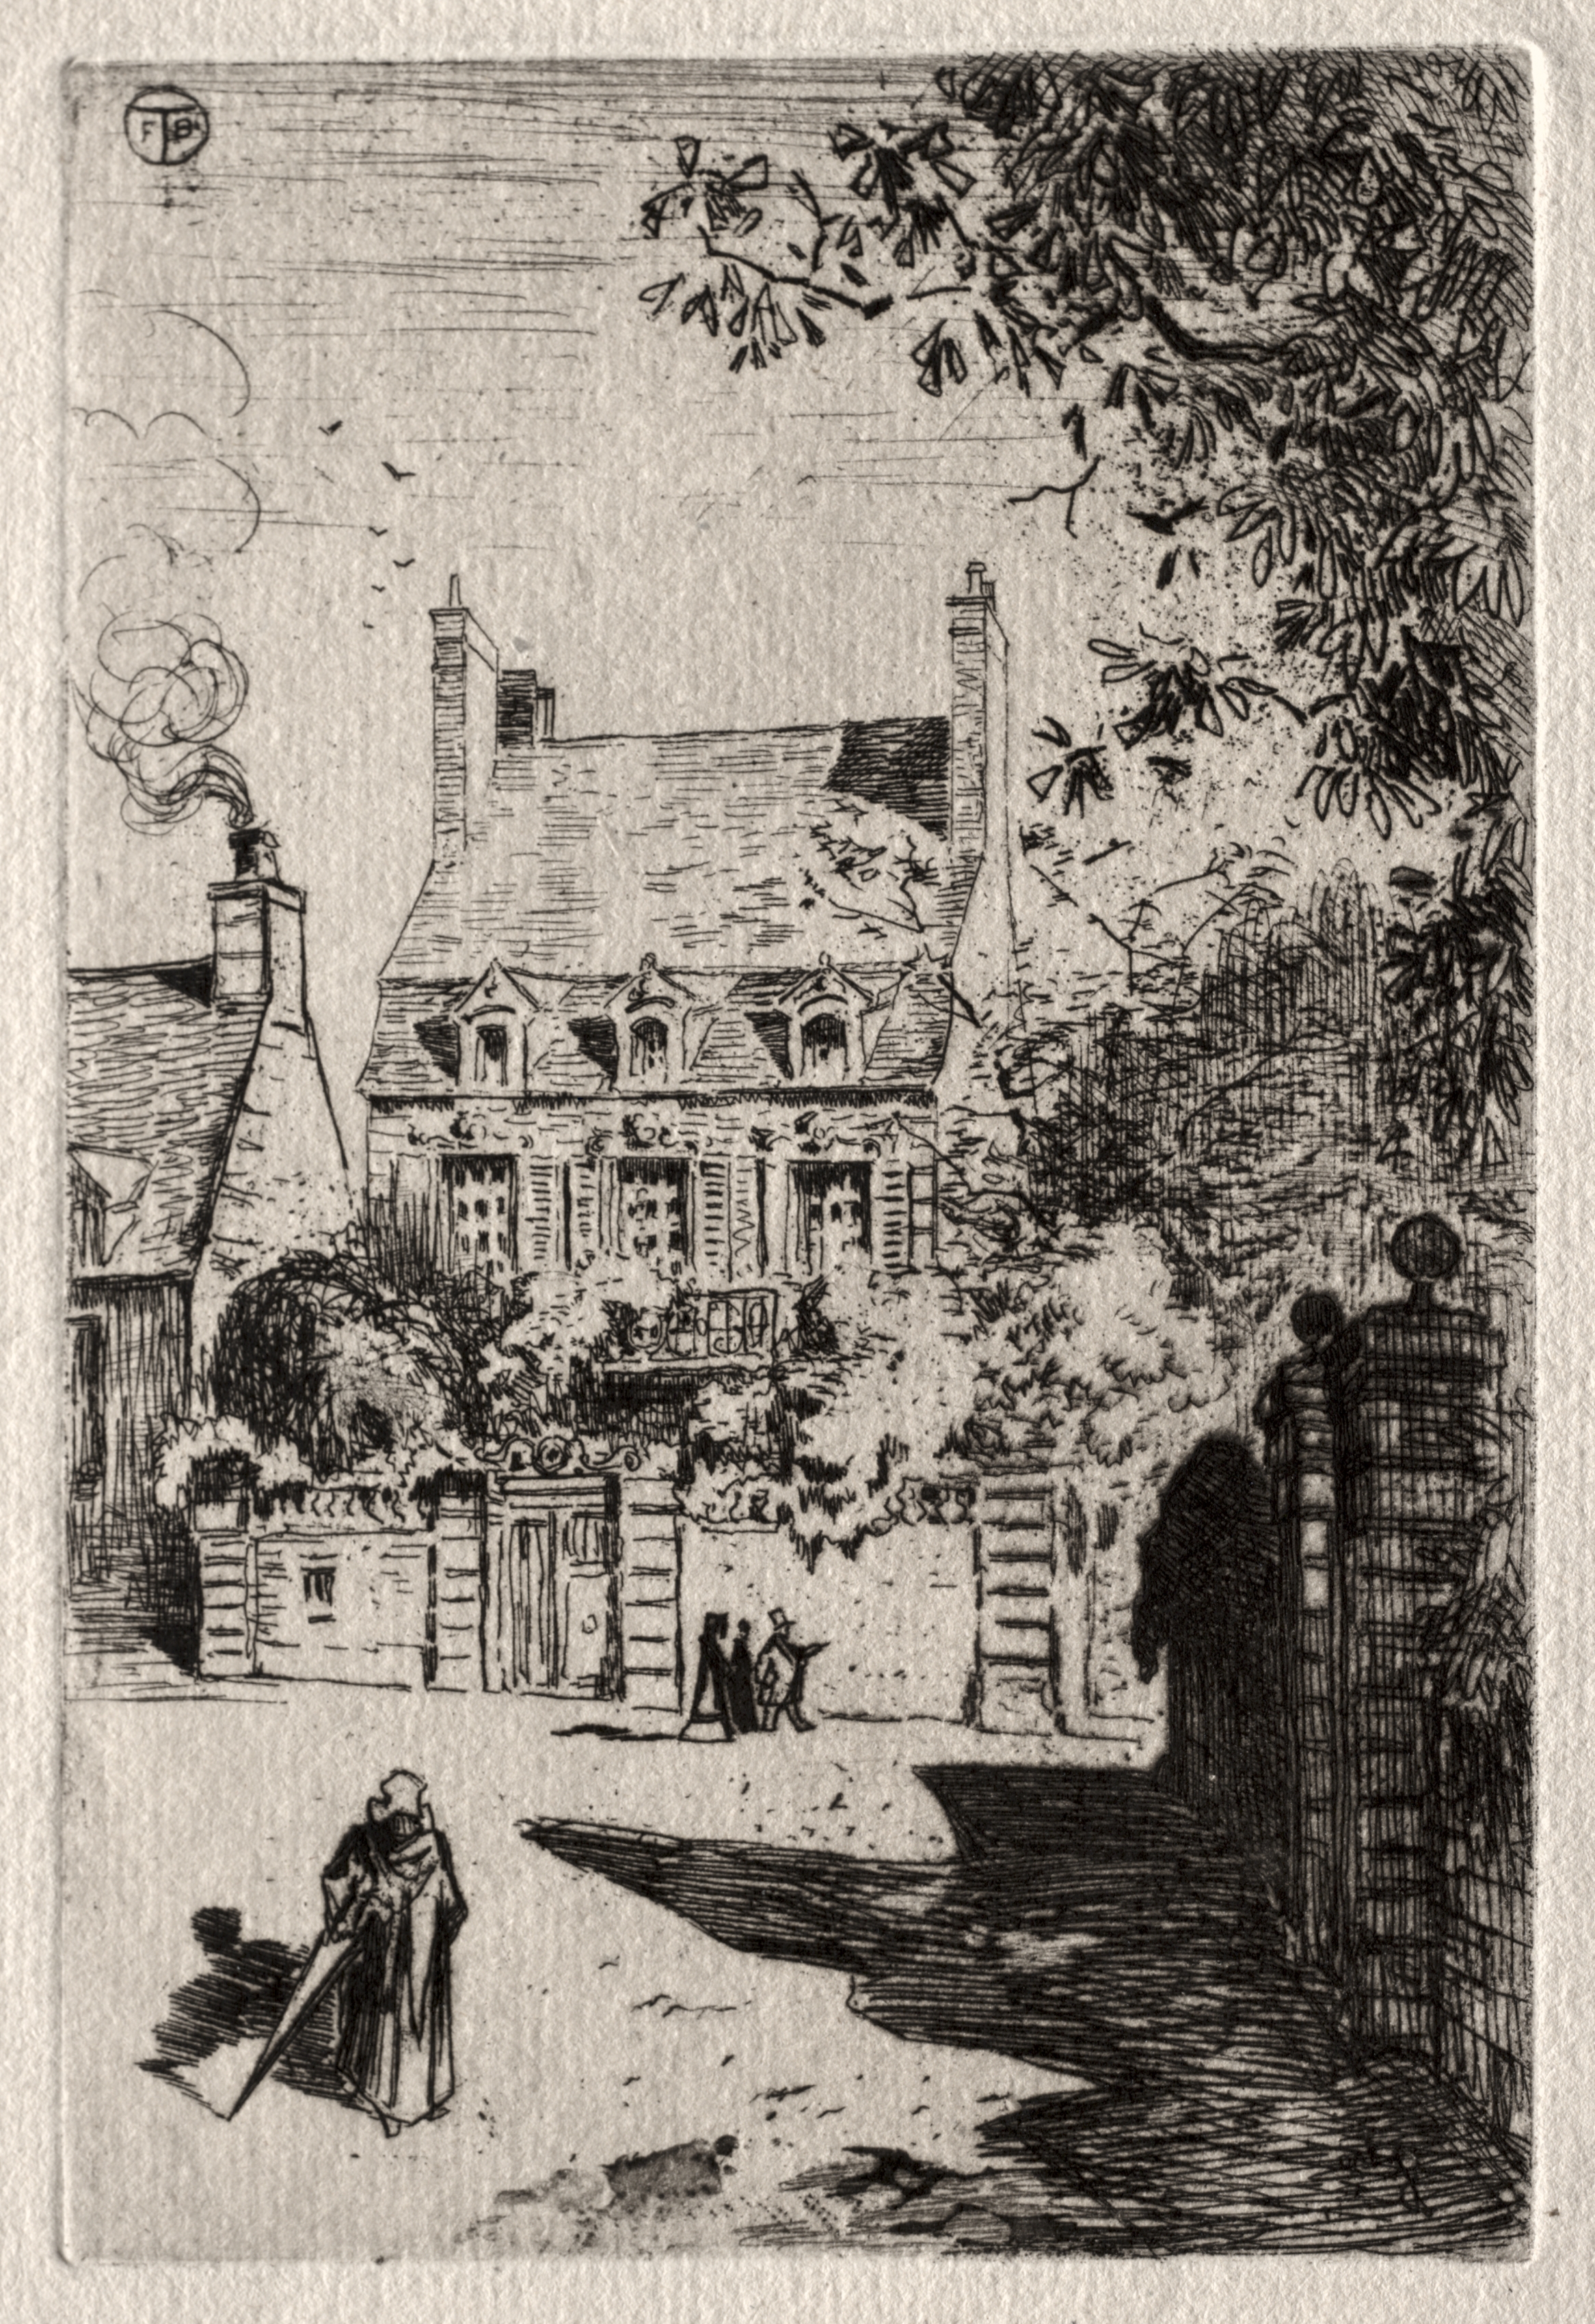 In Province: The House at Orléans